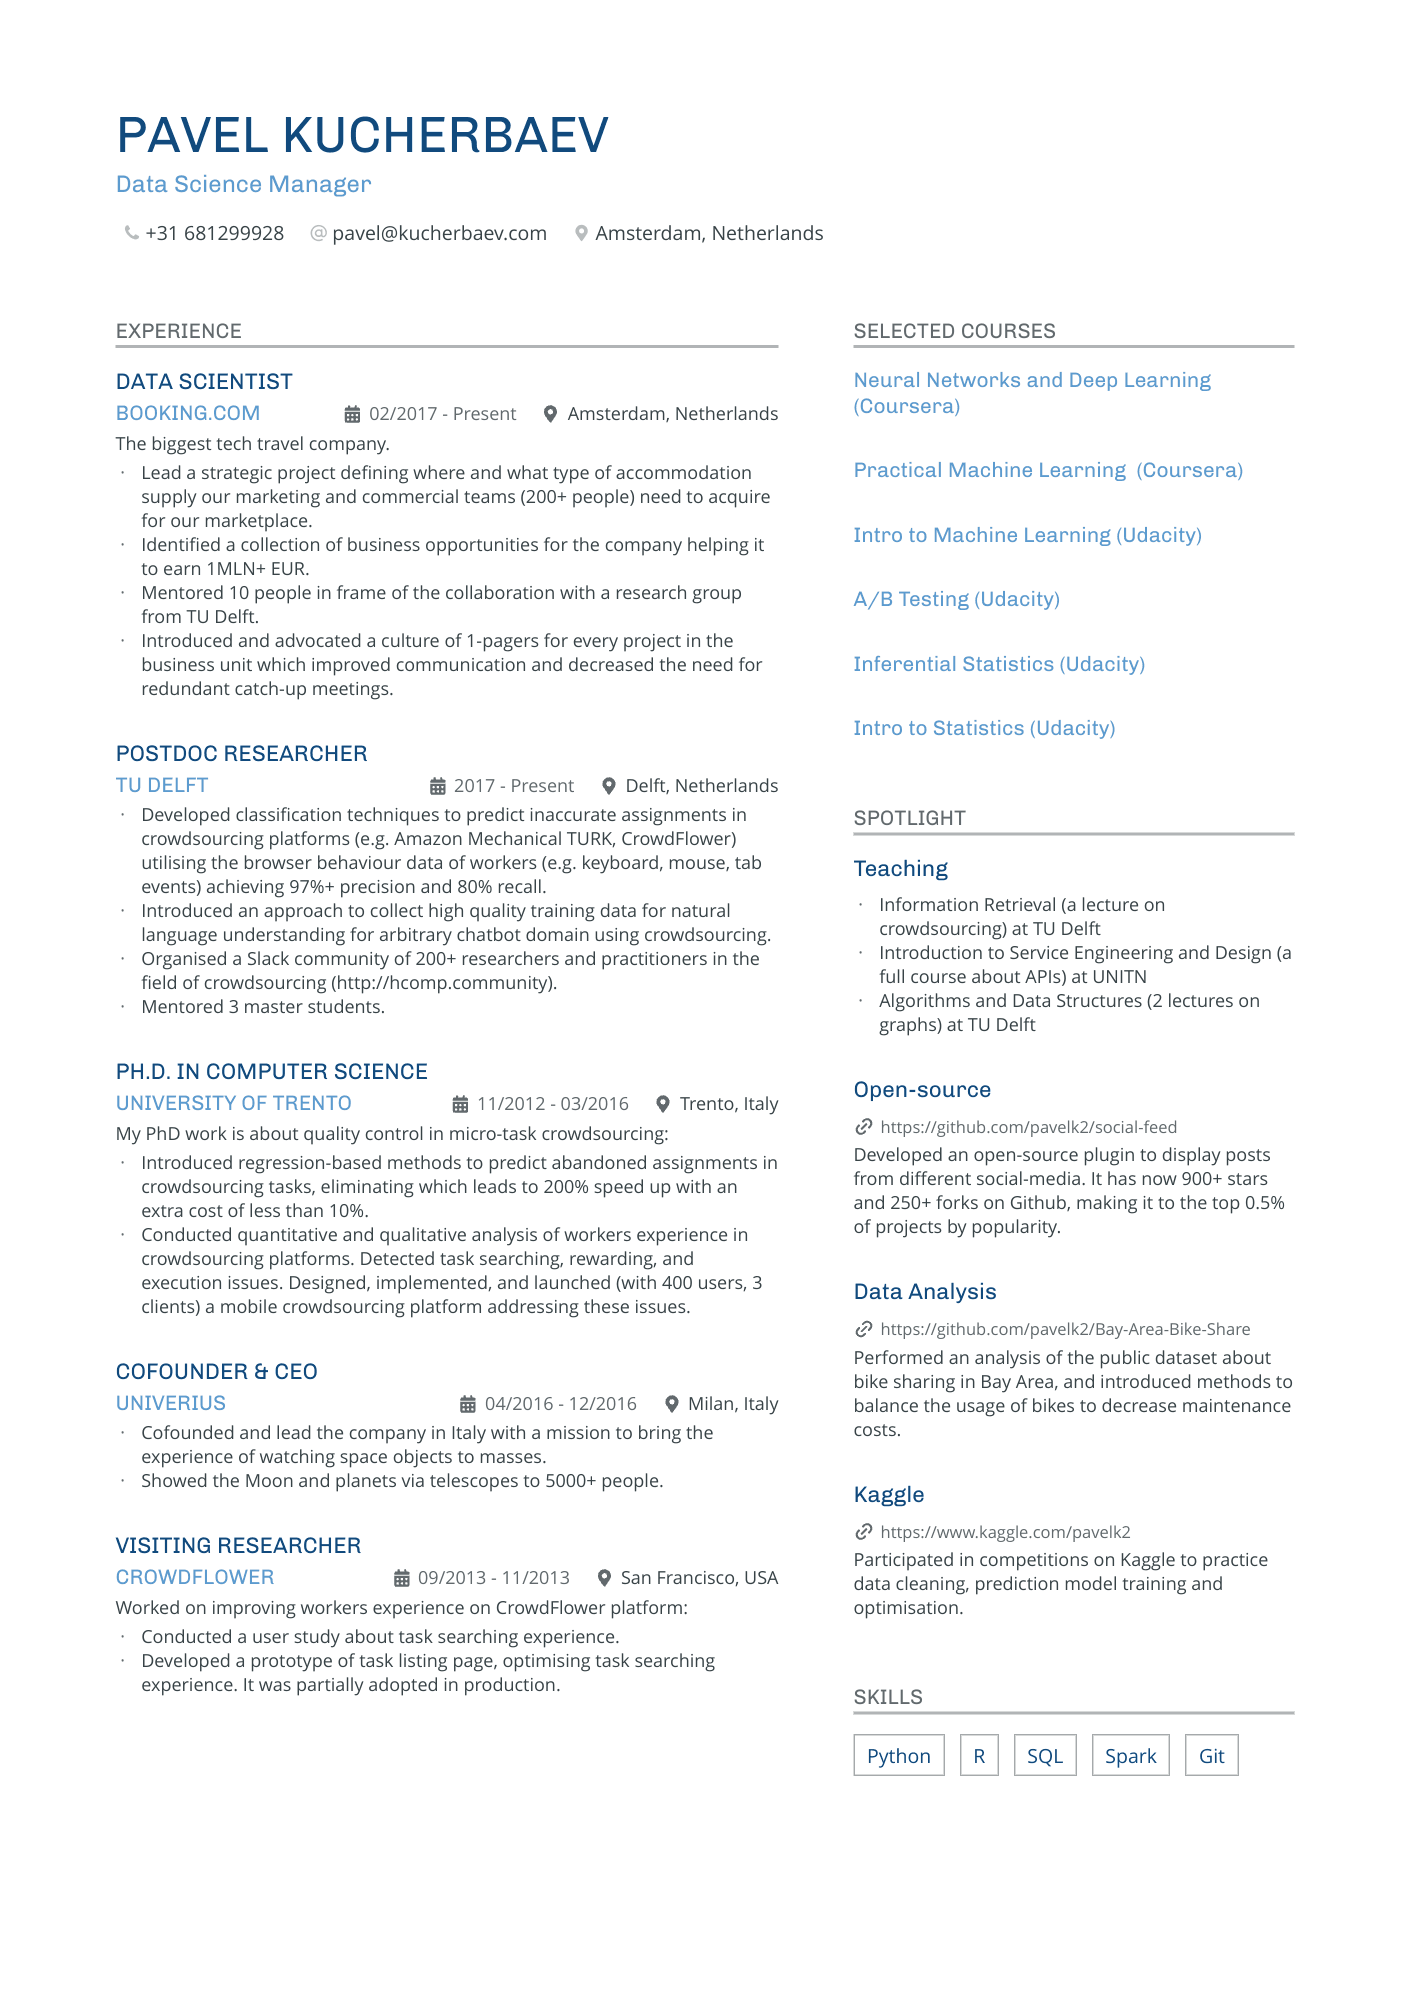 Data Science Manager resume example